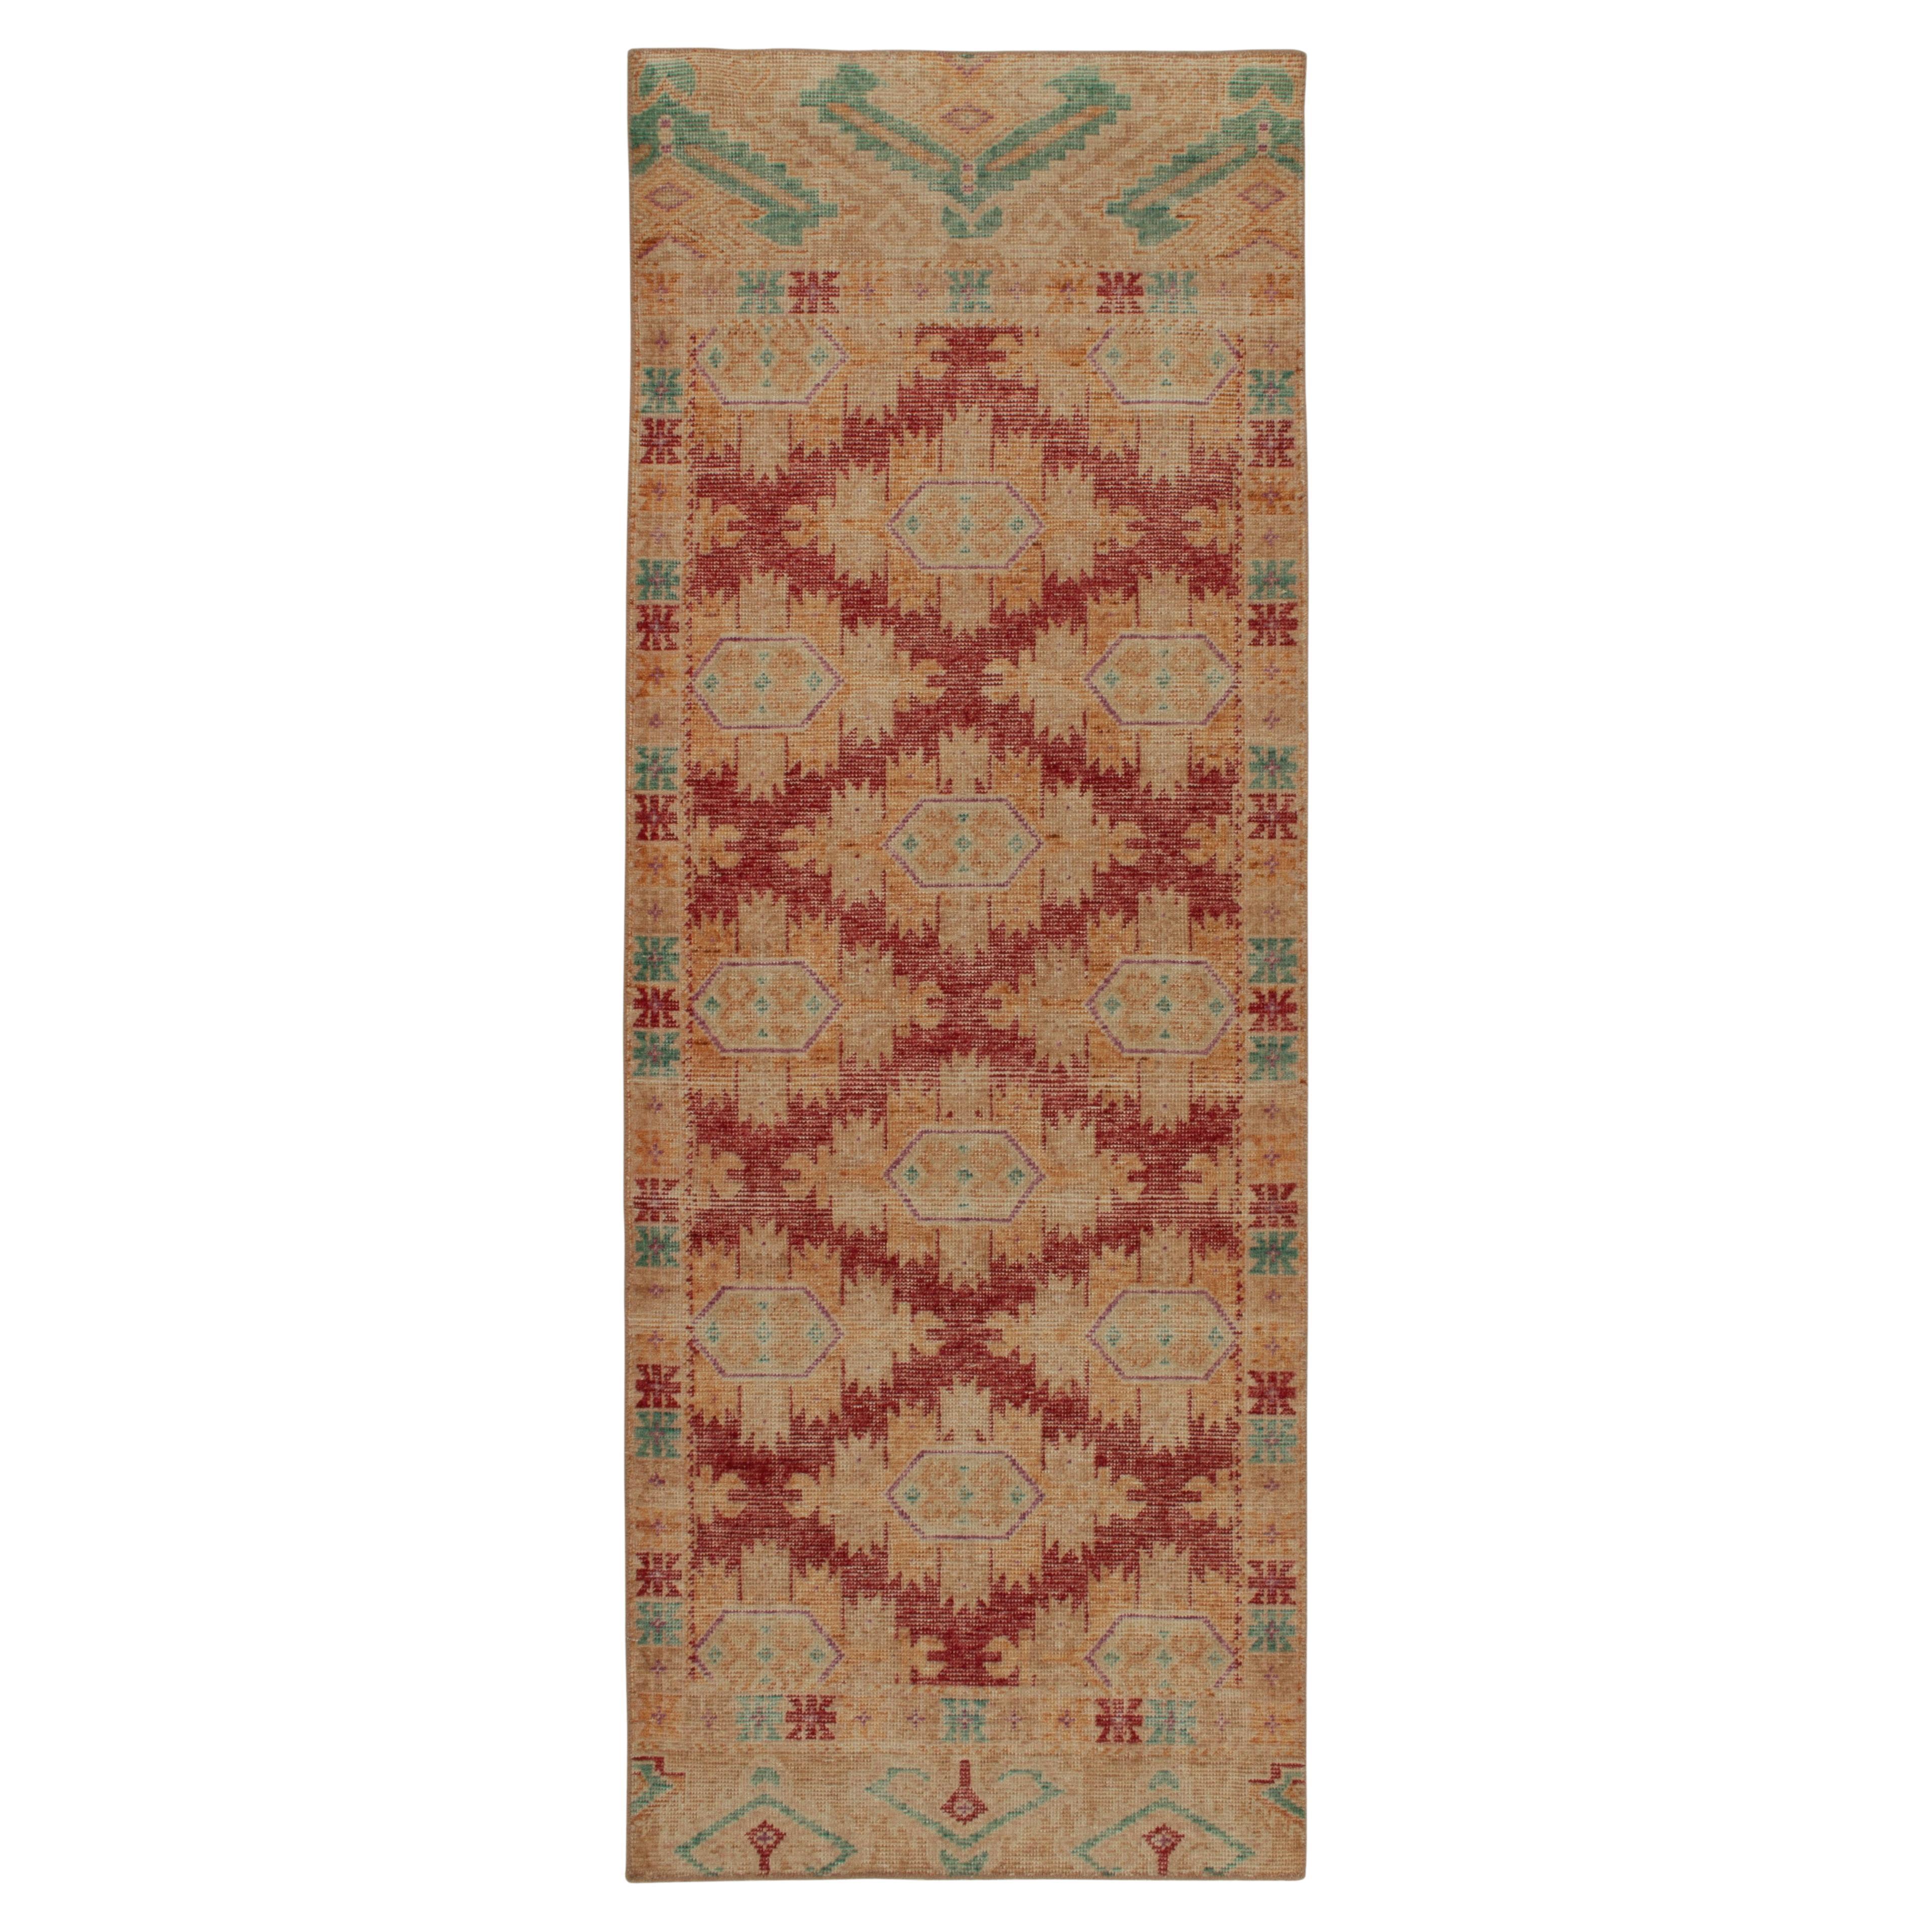 Rug & Kilim’s Distressed Bokhara Style Runner in Red, Beige & Gold Medallions